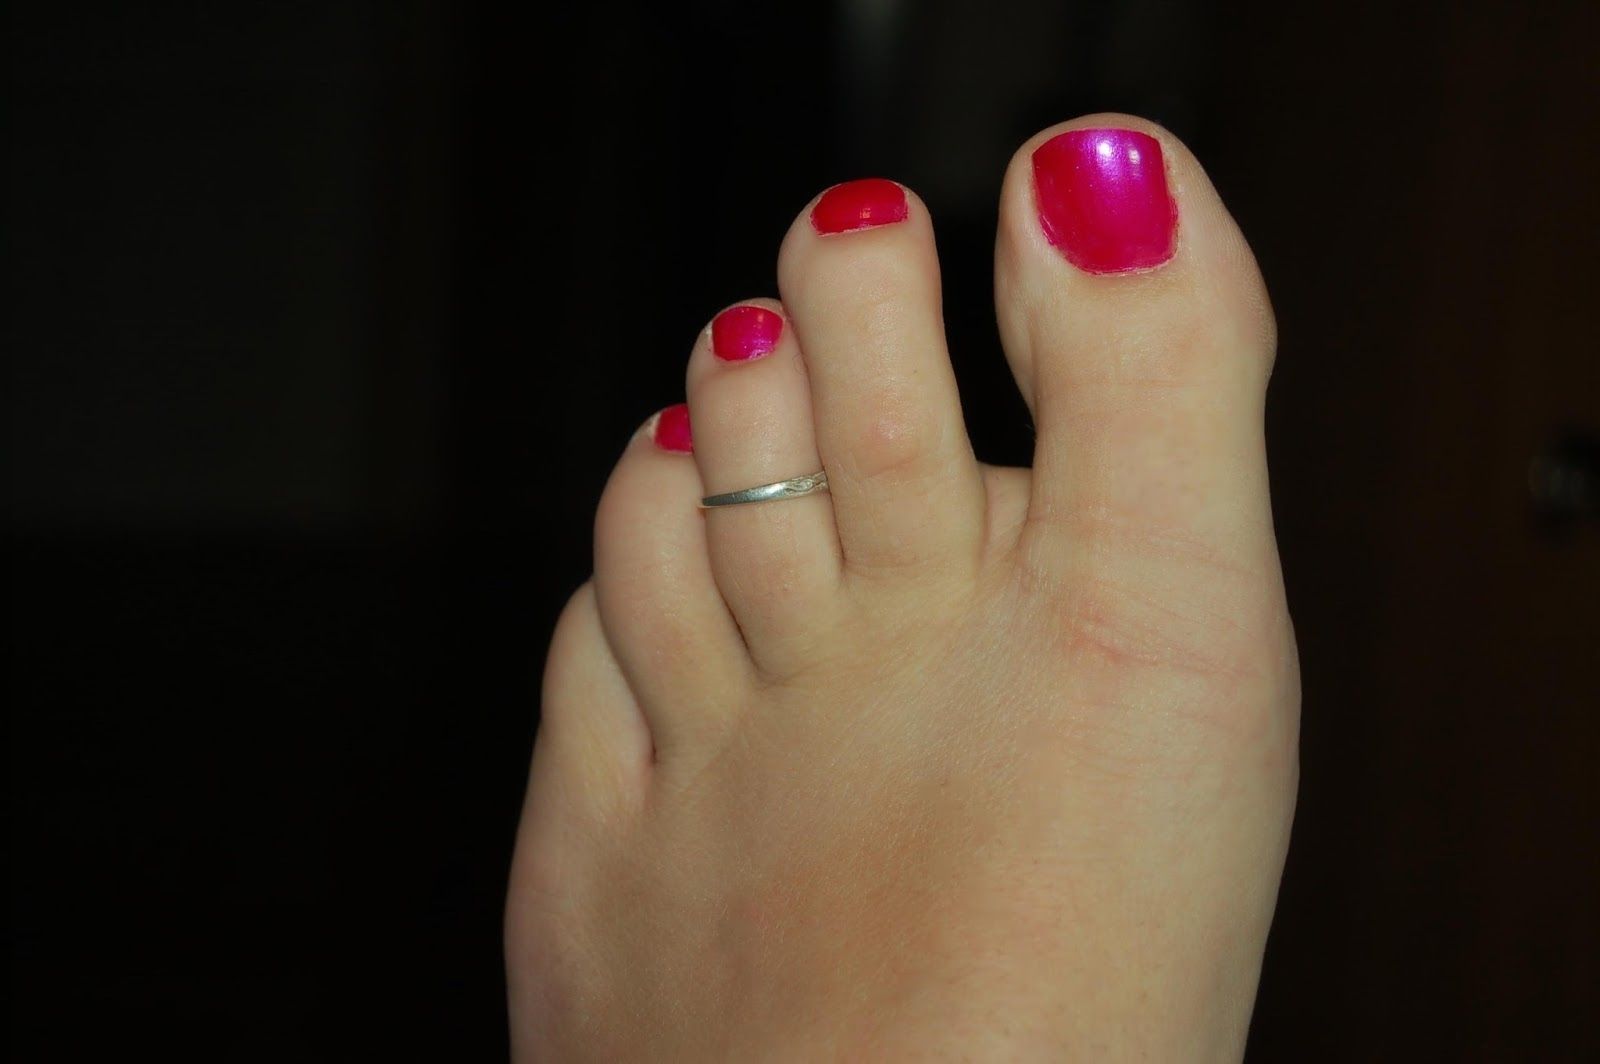 It's Ok For Men To Have Painted Nails In Public: What About Toe Pertaining To Most Current Toe Rings For Men (View 1 of 15)